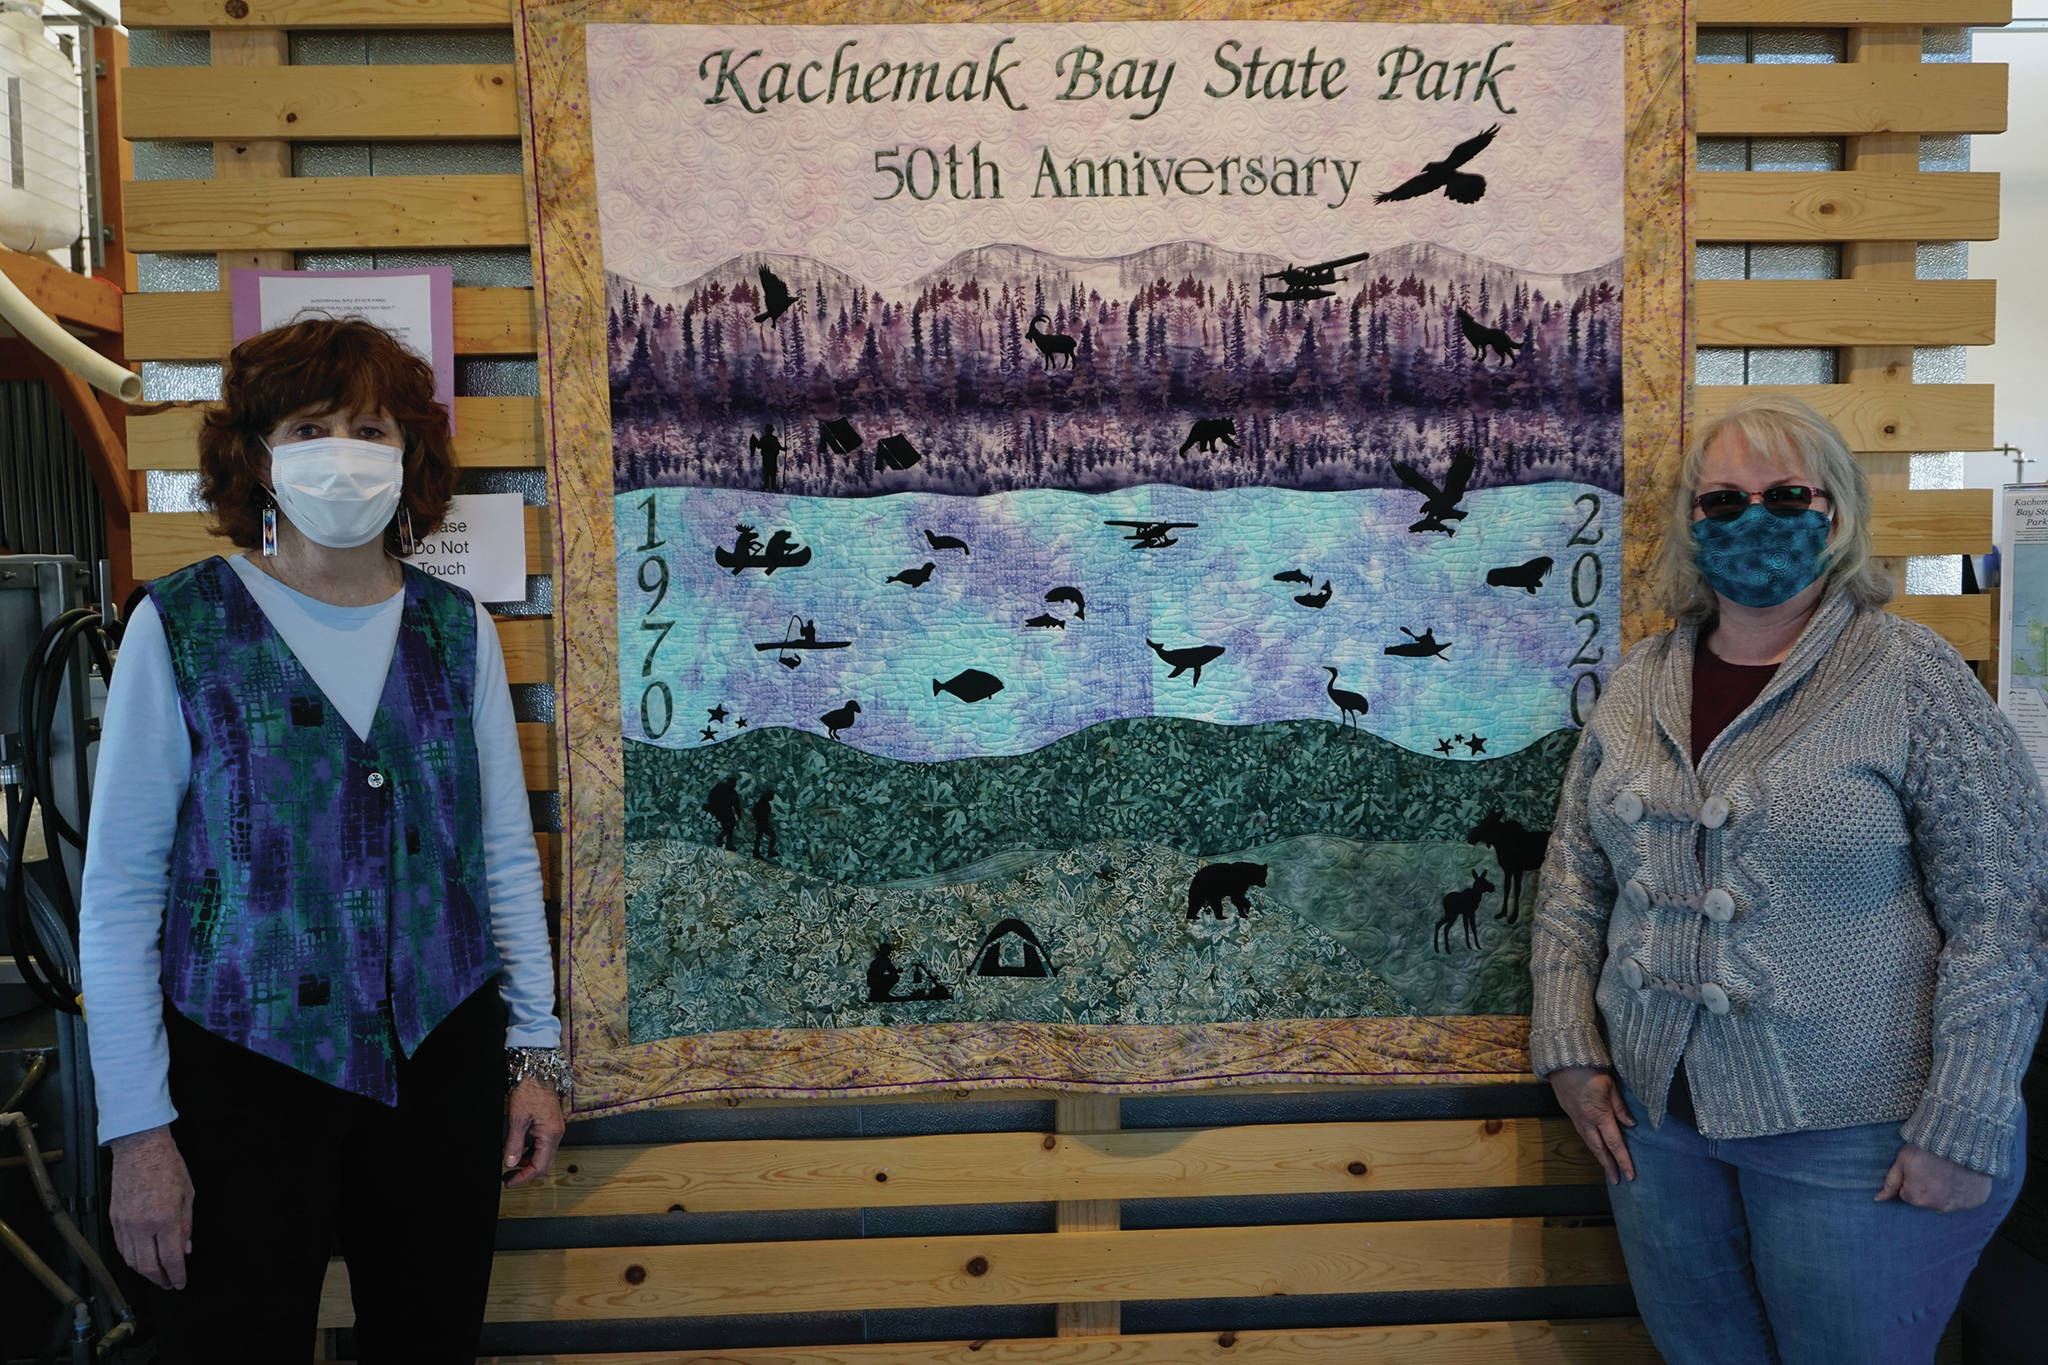 Patrice Krant, left, and Karrie Youngblood, right, pose next to their quilt commemorating the 50th anniversary of Kachemak Bay State Park on Saturday, May 16, 2020, at Grace Ridge Brewery in Homer, Alaska. Krant designed and sewed the quilt and Youngblood did the quilting. Rick Rosebbloom and Krant donated materials and funded the quilt. The back of the quilt has a map of Kachemak Bay State Park. The quilt also features text listing 50 things to do in the park. The quilt was unveiled last Saturday along with the introduction of a special Grace Ridge 50th Anniversary beer. (Photo by Michael Armstrong/Homer News)